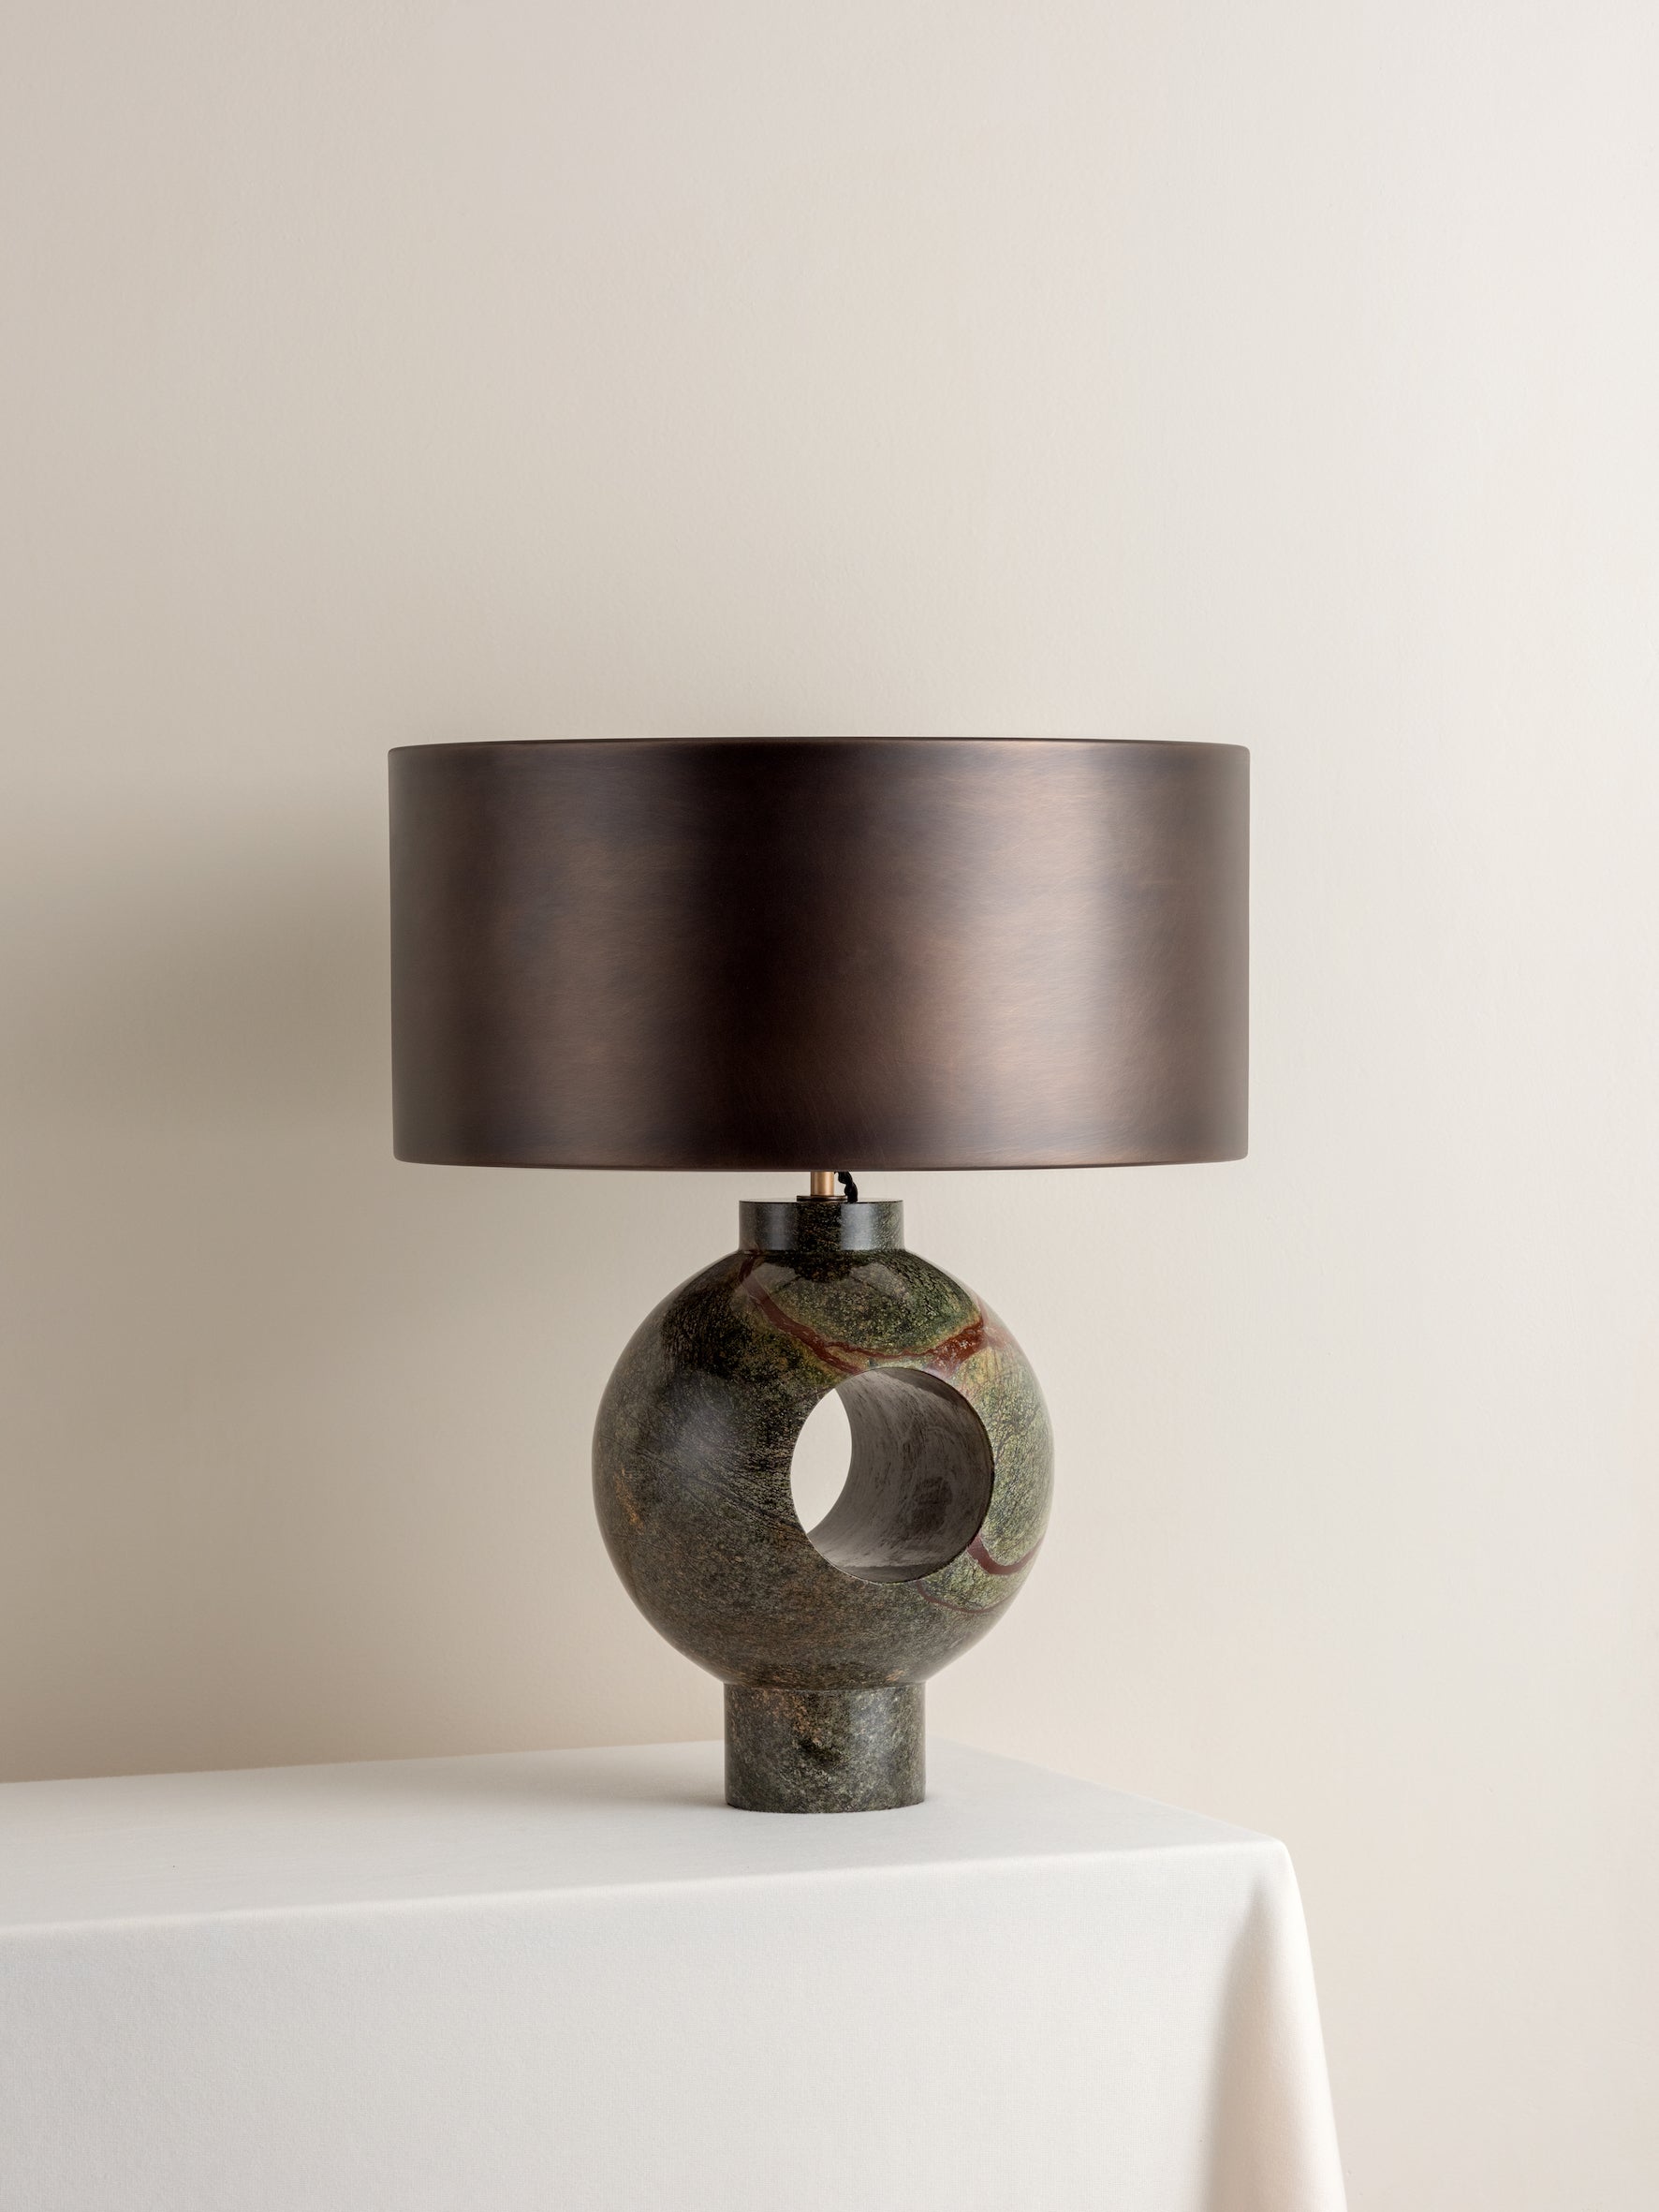 Editions marble lamp with + bronze shade | Table Lamp | Lights & Lamps | UK | Modern Affordable Designer Lighting